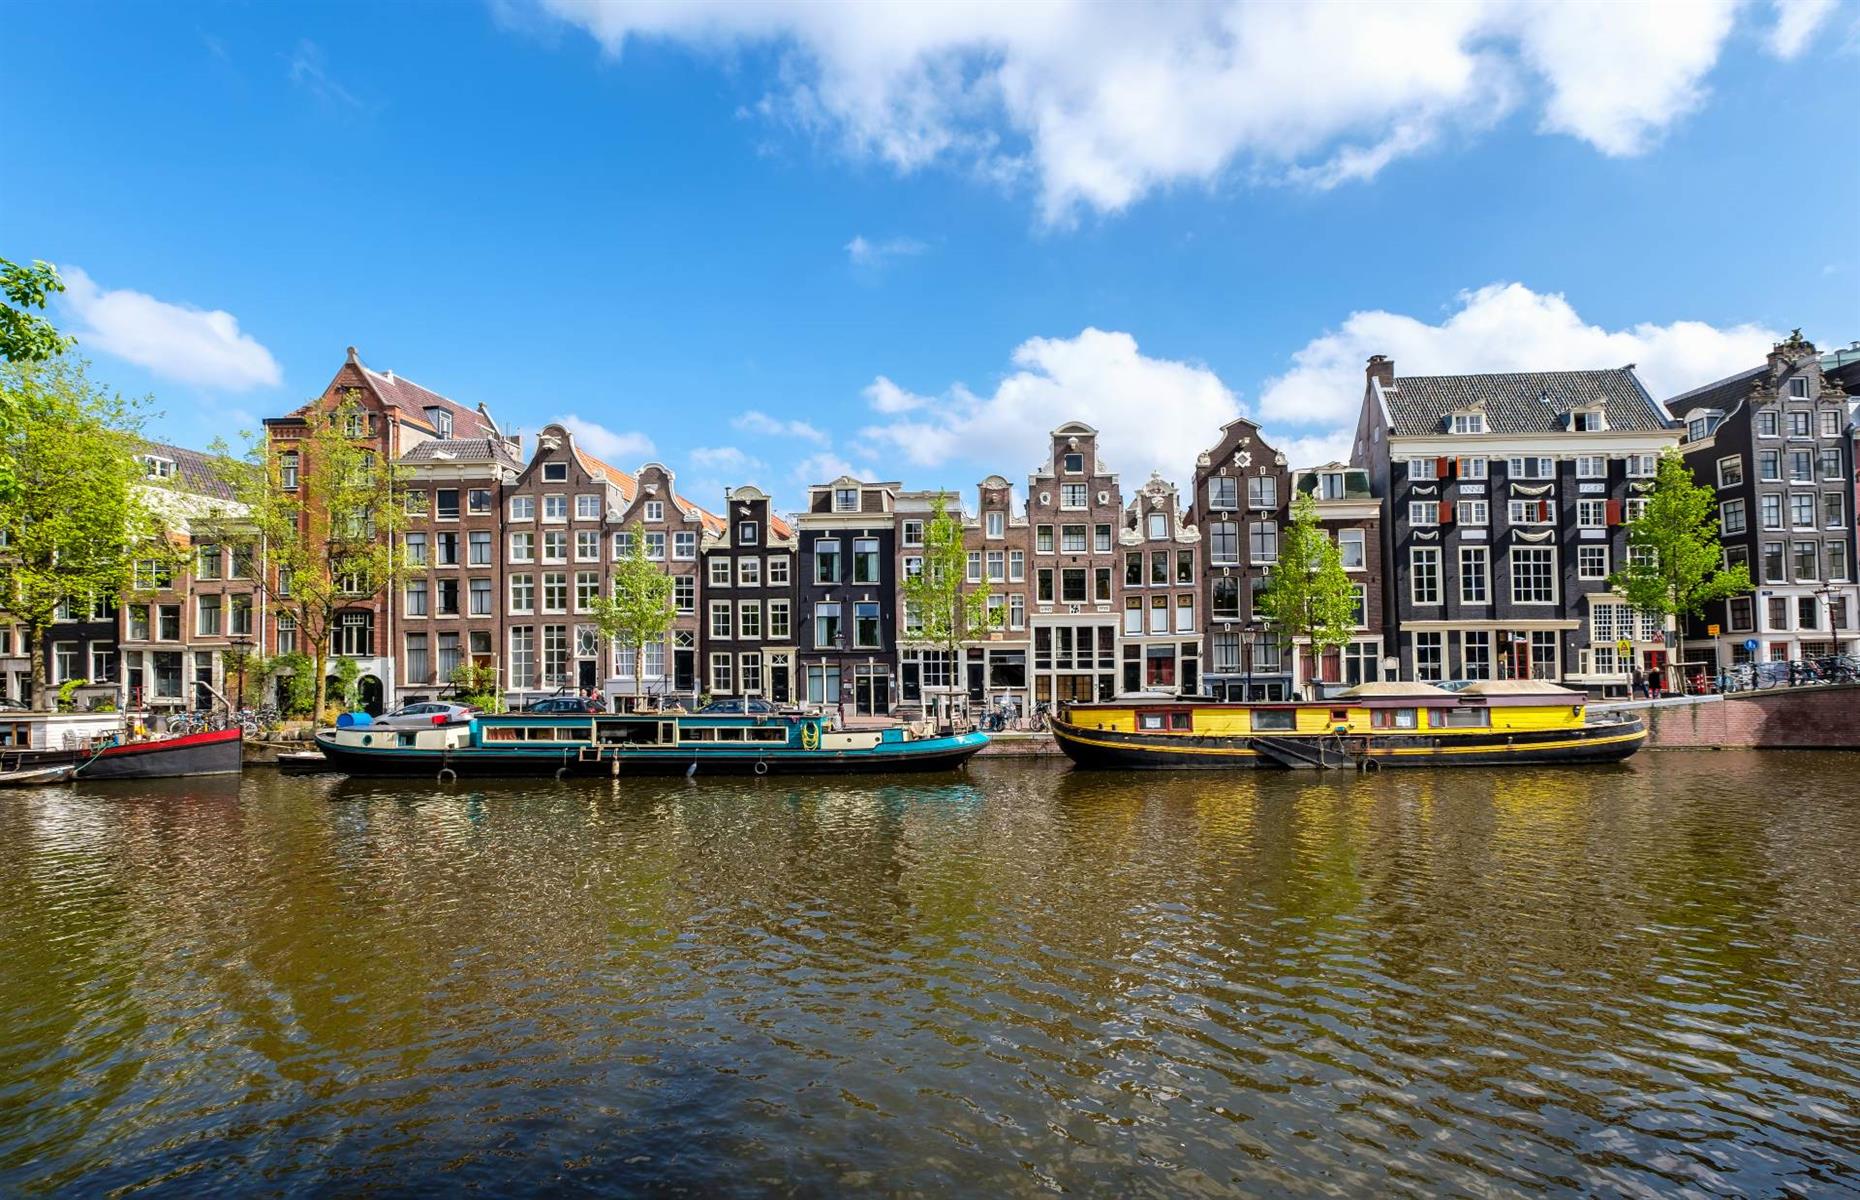 <p>Famed for its sprawling maze of waterways, <a href="https://www.loveexploring.com/guides/85437/explore-amsterdam-top-things-to-see-and-do-best-hotels-and-where-to-eat">Amsterdam</a>’s canals are probably the city’s most iconic feature. The Dutch capital is home to a whopping 165 canals stretching roughly 60 miles (100km) long and connected by over 1,200 bridges. Sitting in the city center framed by gorgeous buildings lies Amsterdam's most photographed waterways known as the Grachtengordel. The 17th century canal ring consists of the Herengracht, Keizersgracht, Prinsengracht and the Singel canals and has been on the UNESCO World Heritage list since 2010. </p>